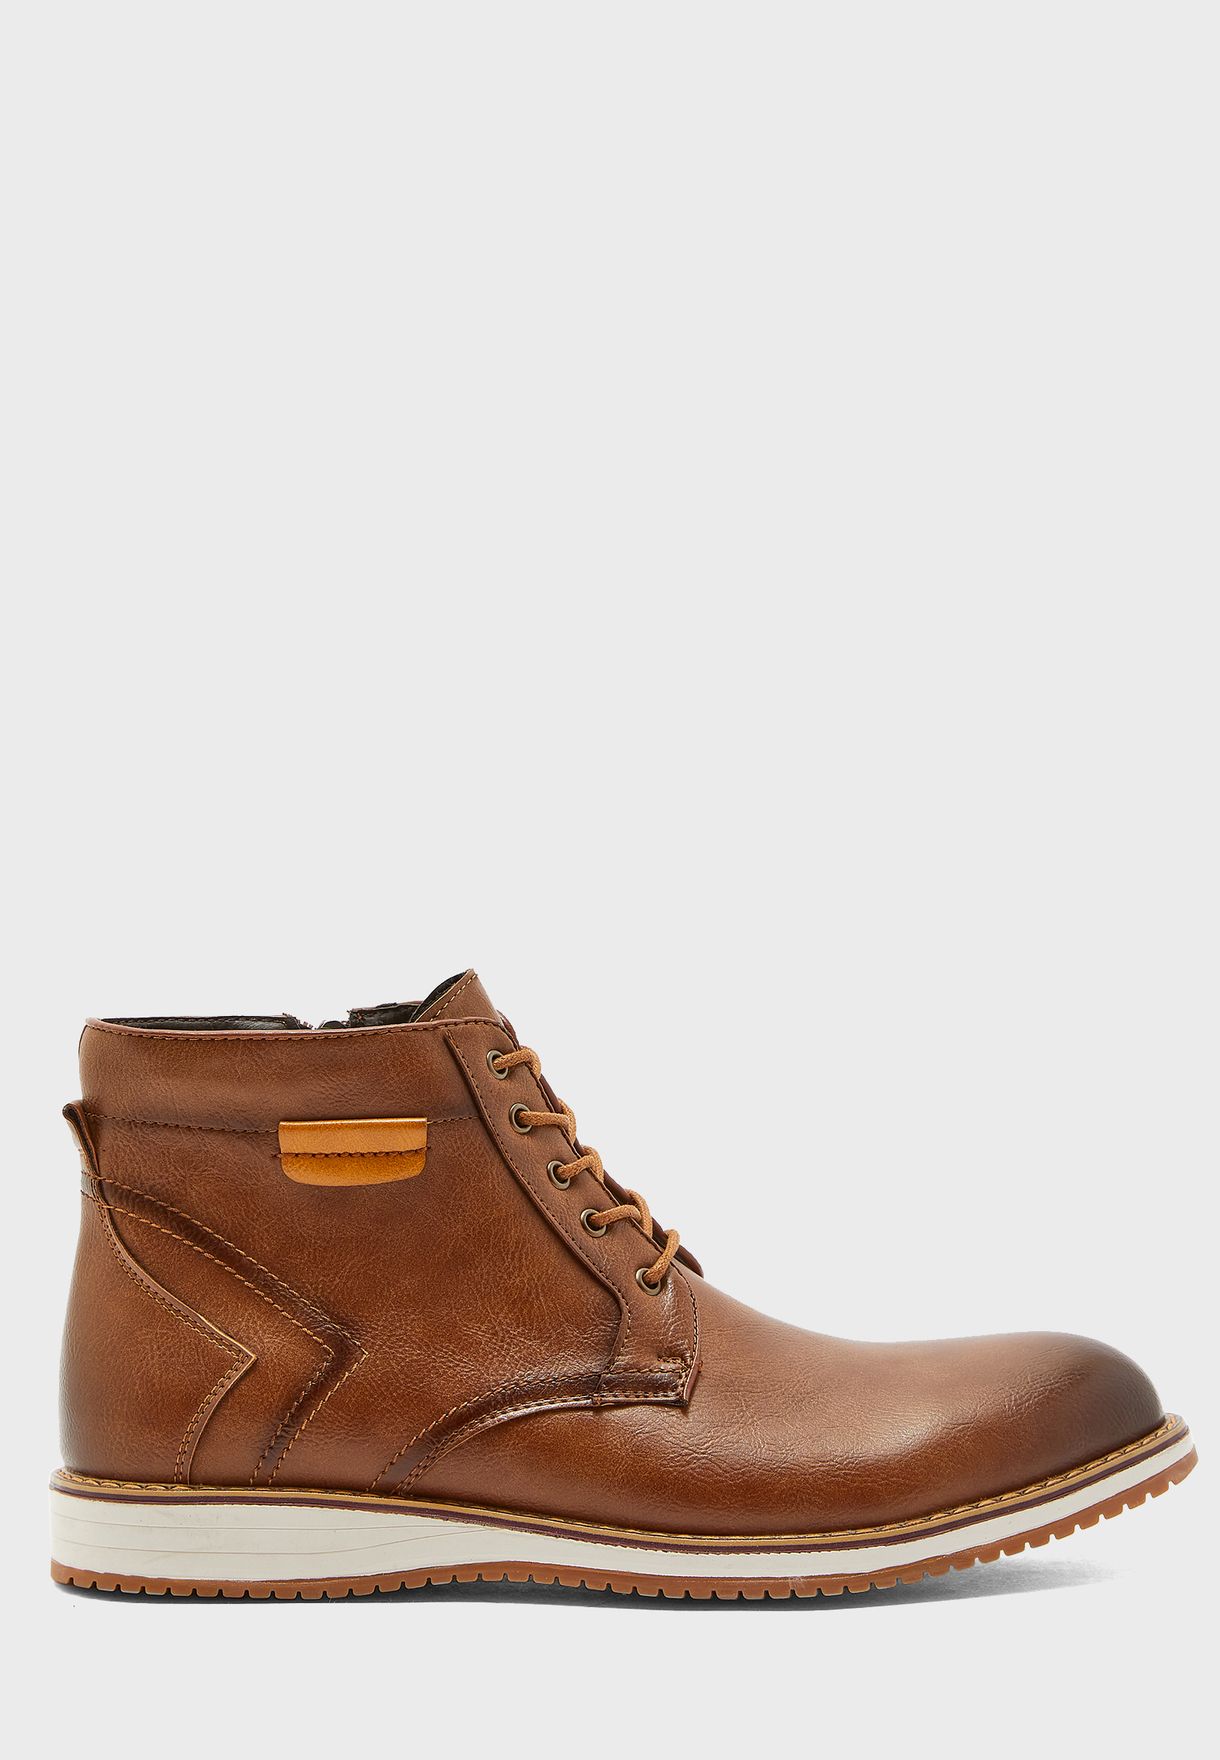 Buy Seventy five brown Casual Boots for 